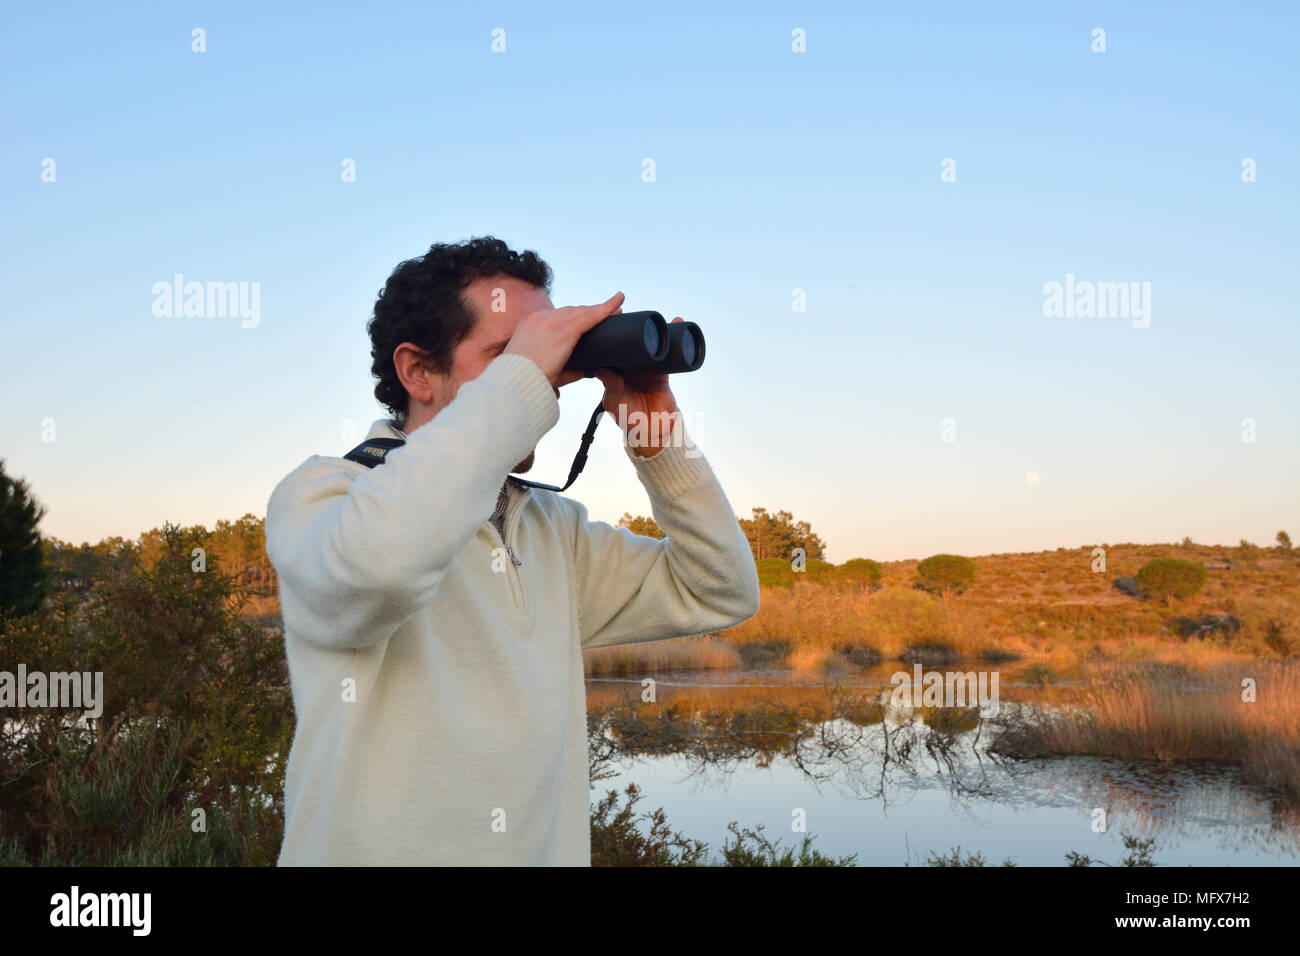 Birdwatching in the Sado Estuary Nature Reserve. Portugal Stock Photo